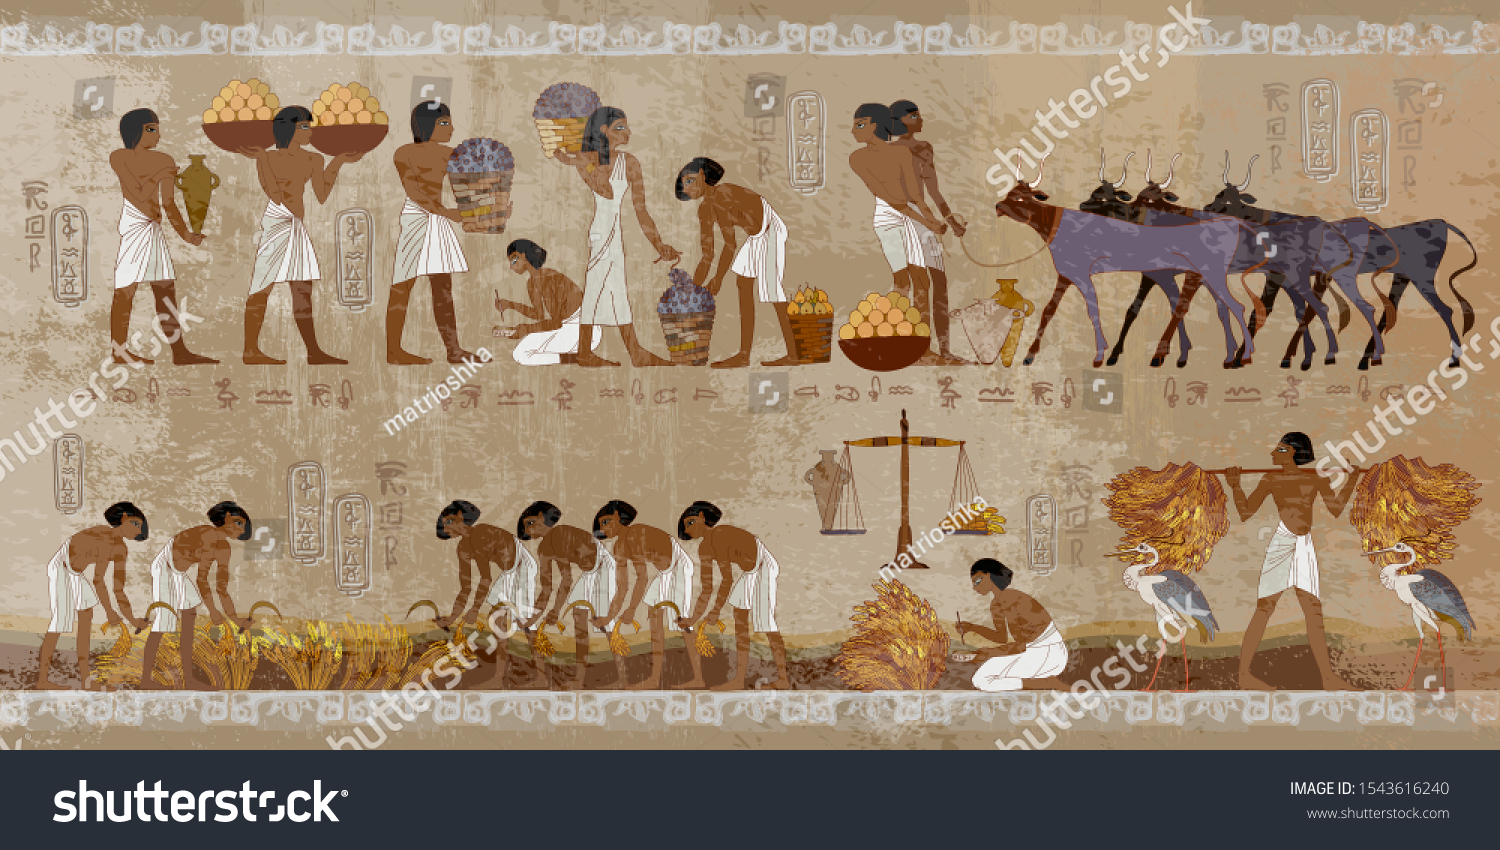 Life in ancient Egypt, frescoes. Egyptians history art. Agriculture, workmanship, fishery, farm. Hieroglyphic carvings on exterior walls of an old temple